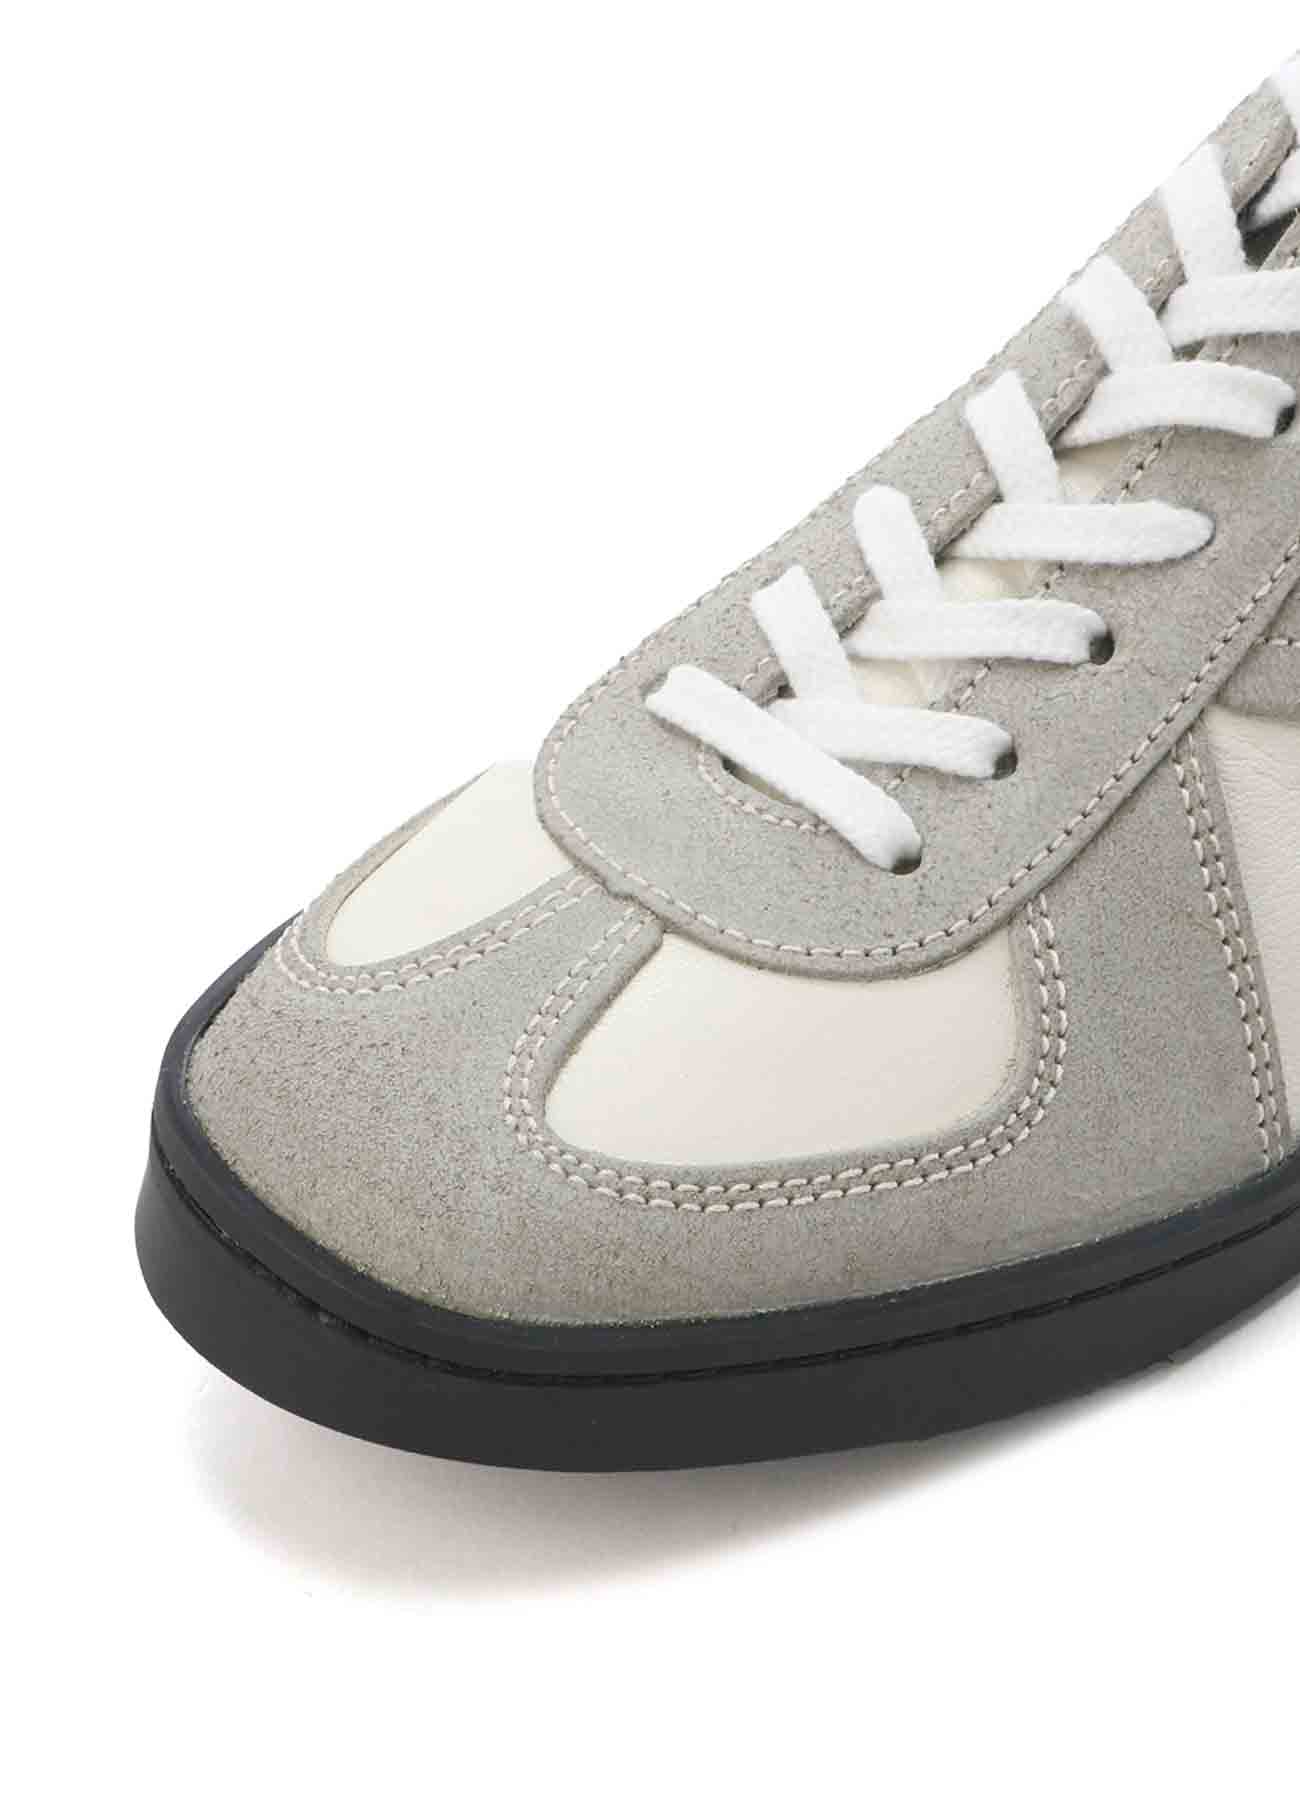 WAX VELOUR COMBINATION LEATHER GERMAN TRAINER